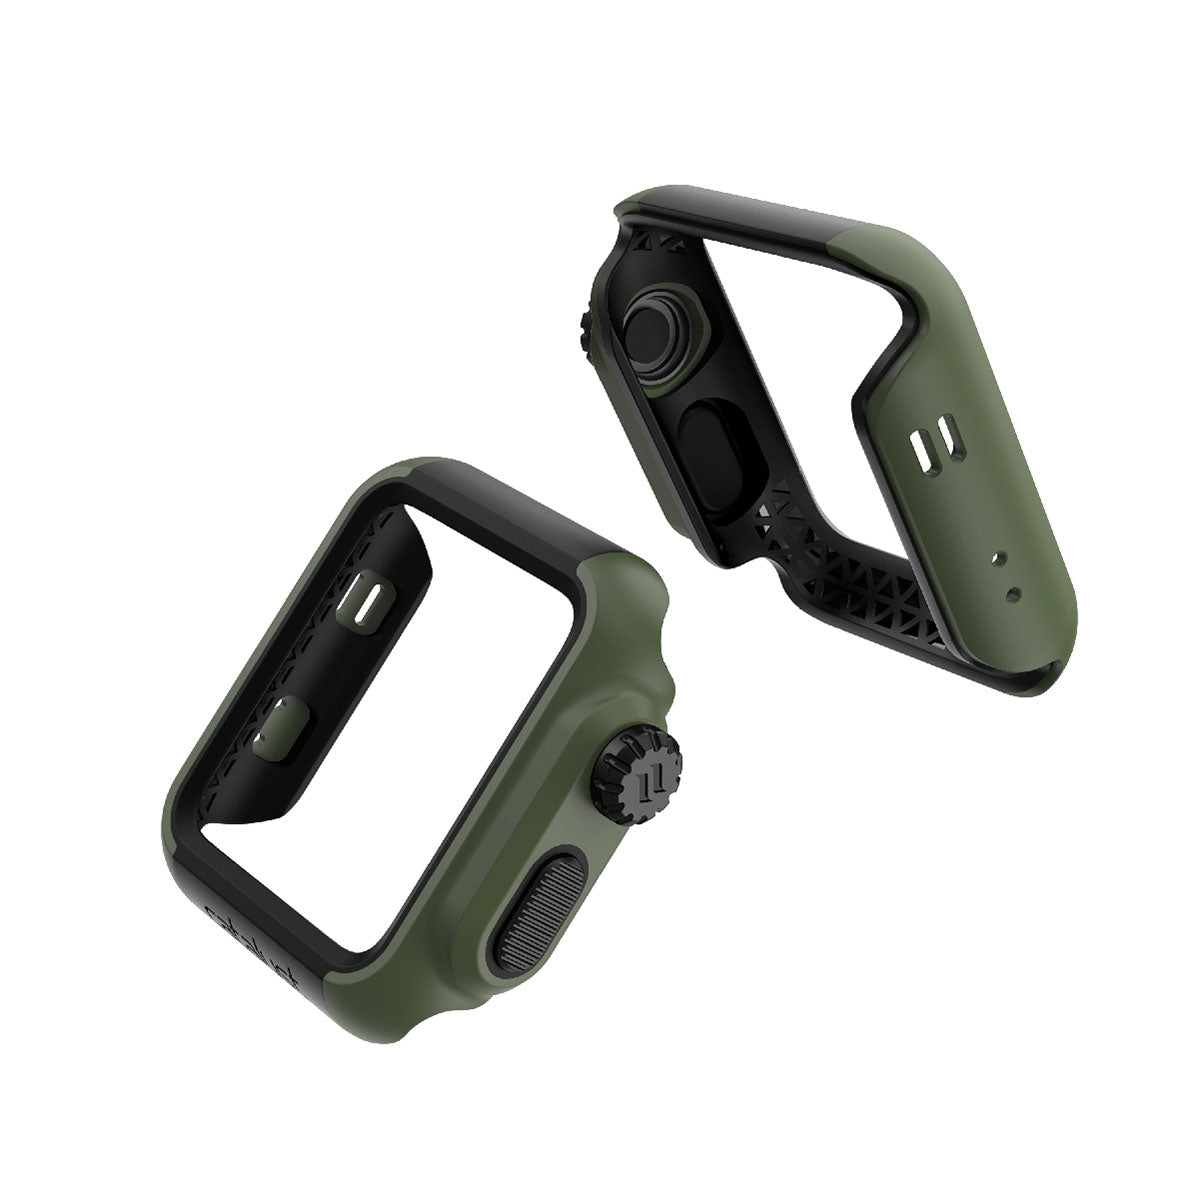 catalyst apple watch series 3 2 42mm impact protection case views of all the sides of the impact protection case army green